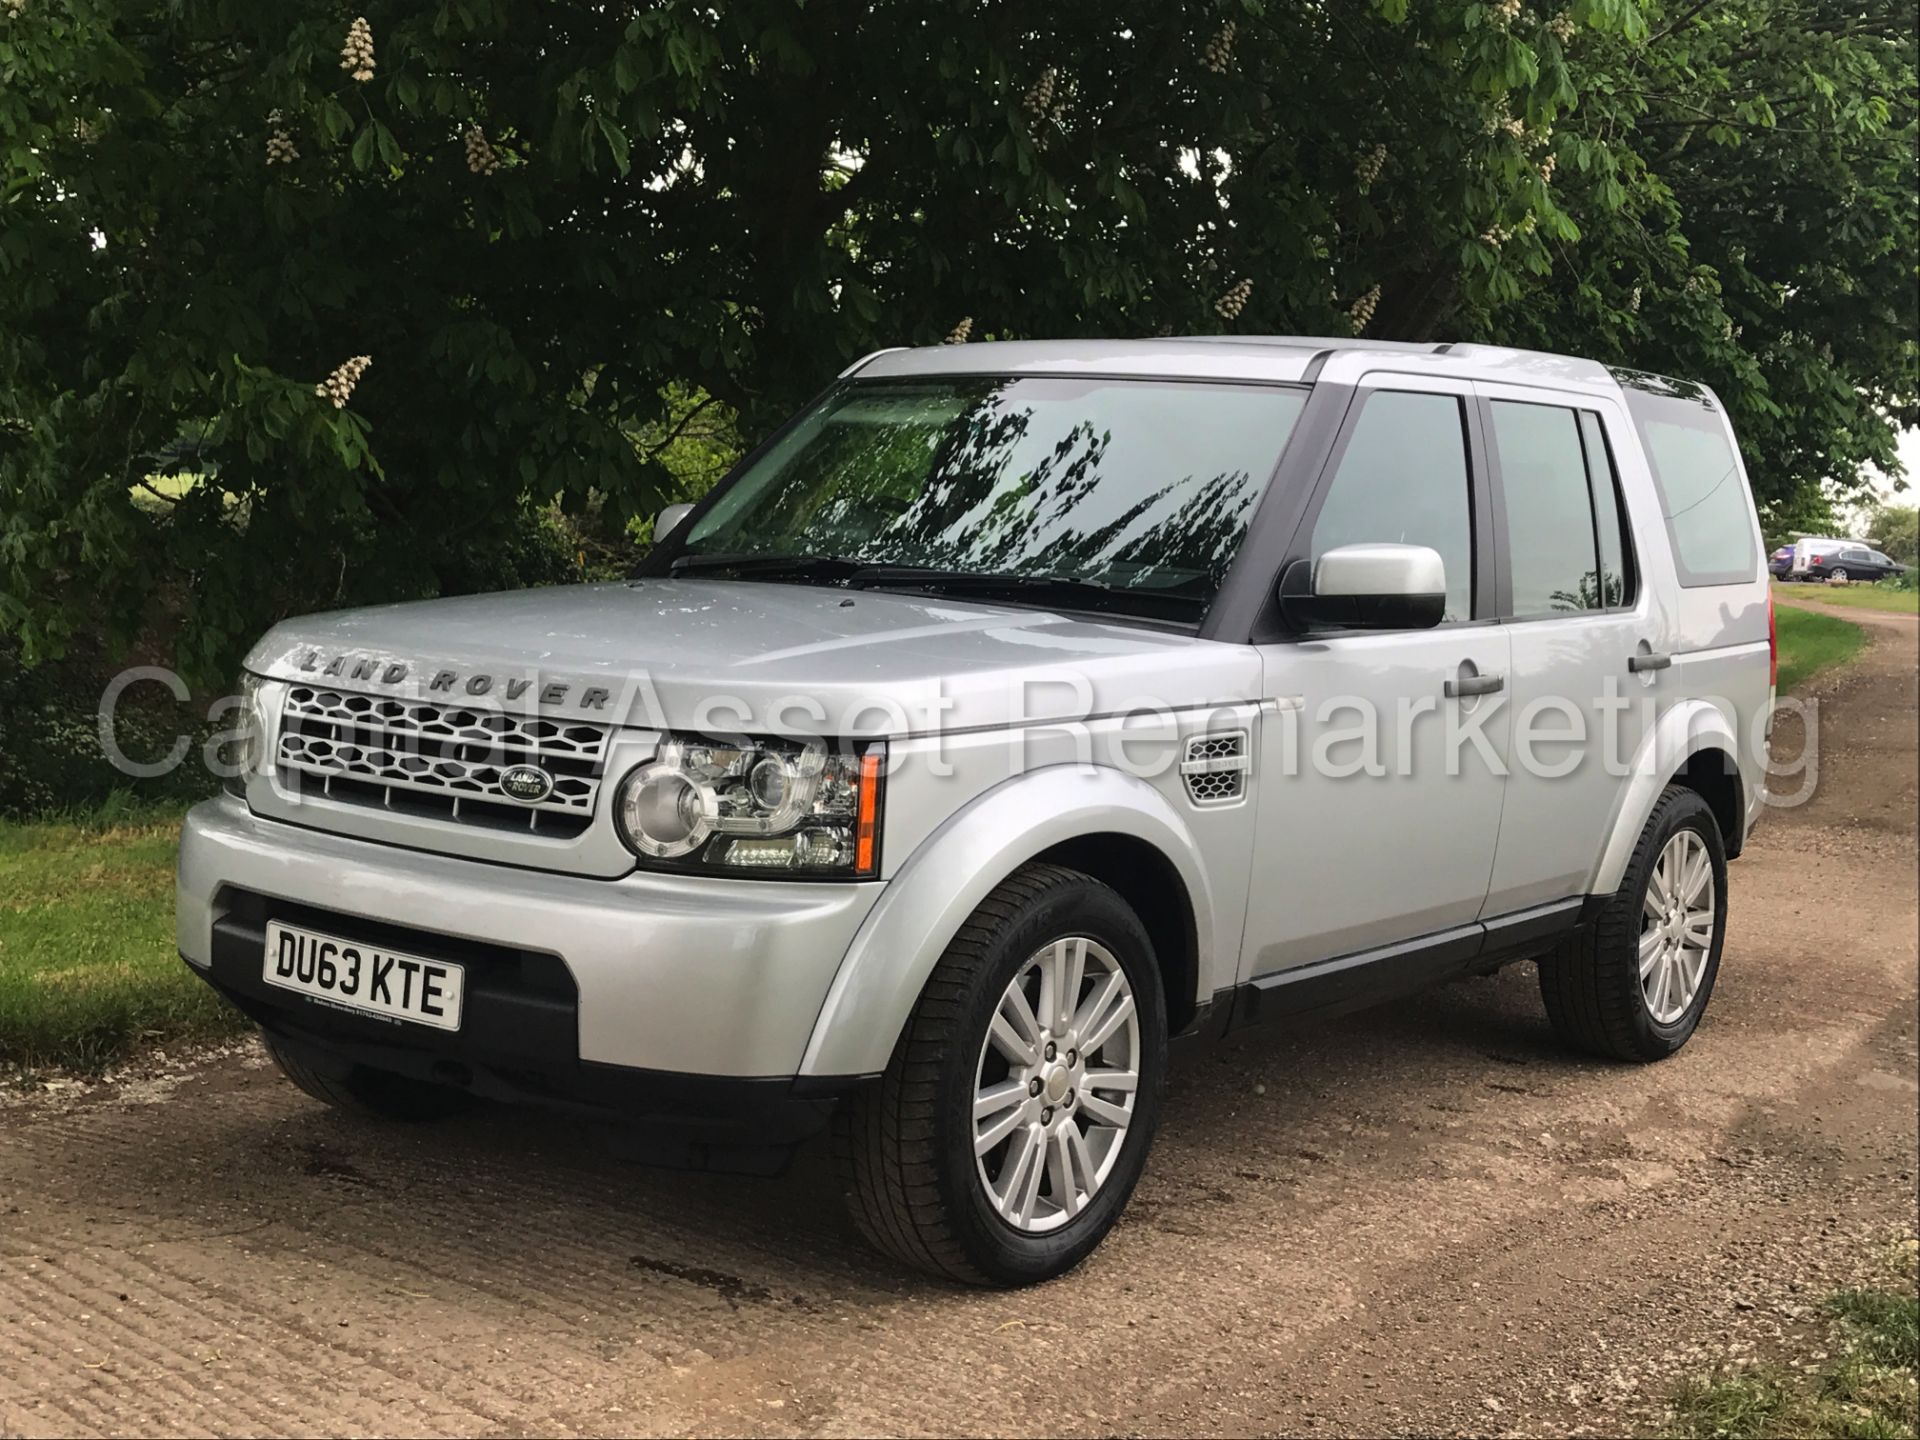 (On sale) LAND ROVER DISCOVERY 4 (2014 MODEL) '3.0 SDV6 -AUTO- 255 BHP - 7 SEATER'(1 OWNER FROM NEW)